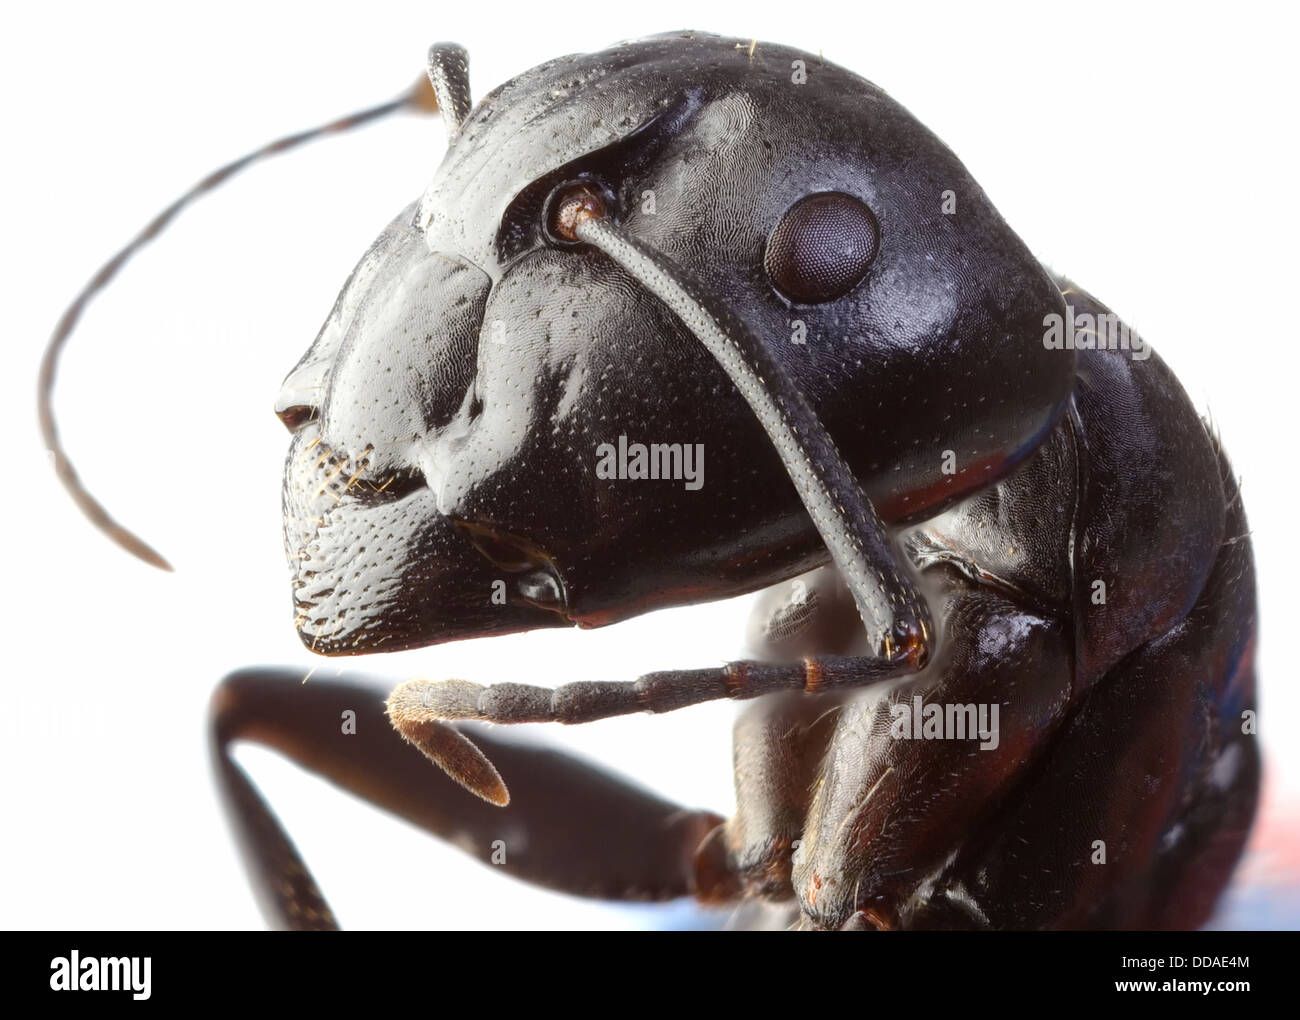 Black Garden Ant Low Scale Magnification Stock Photo